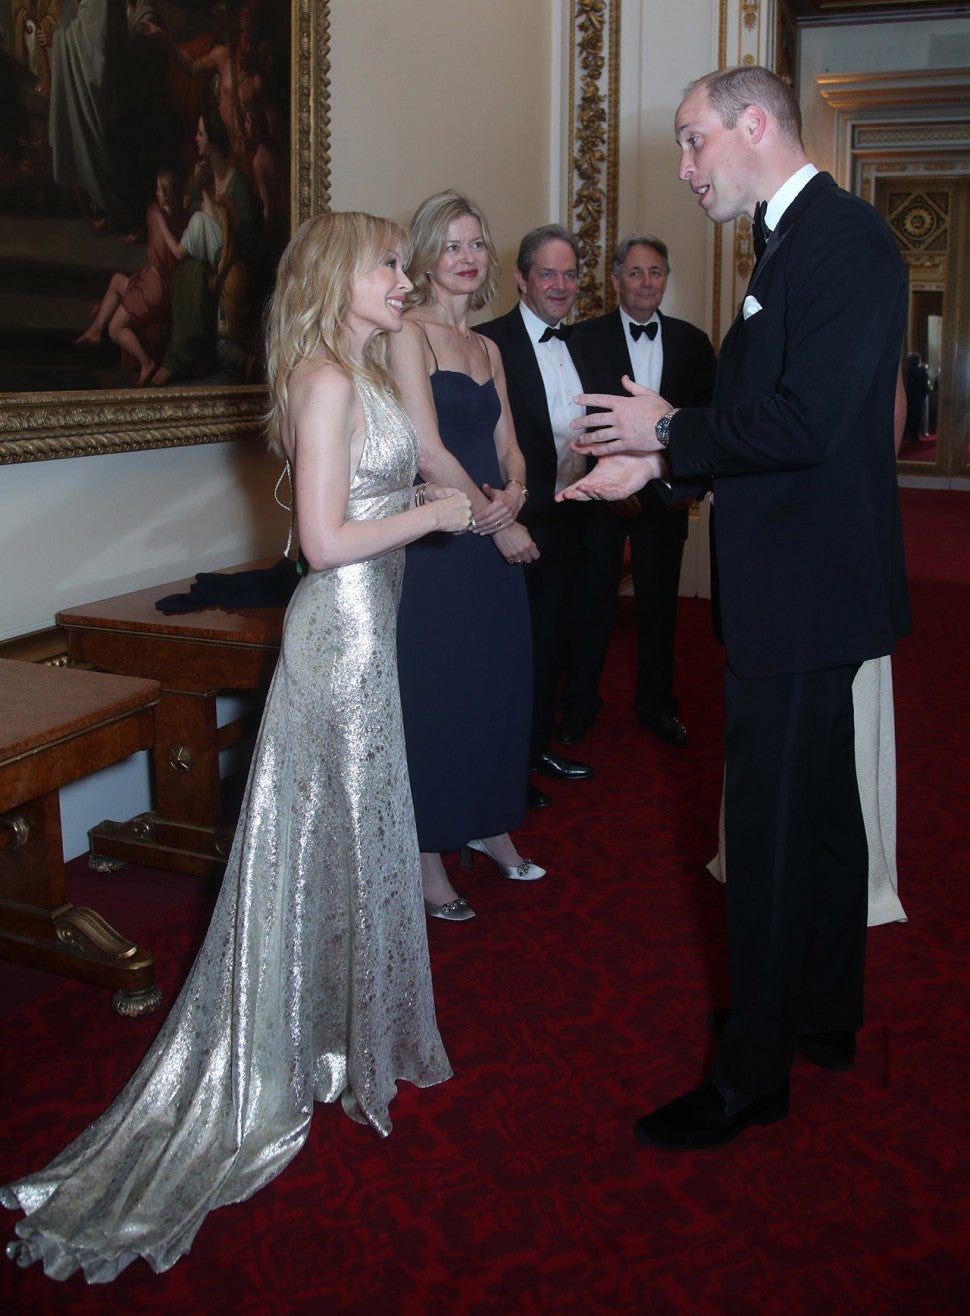 Kylie Minogue and Prince William